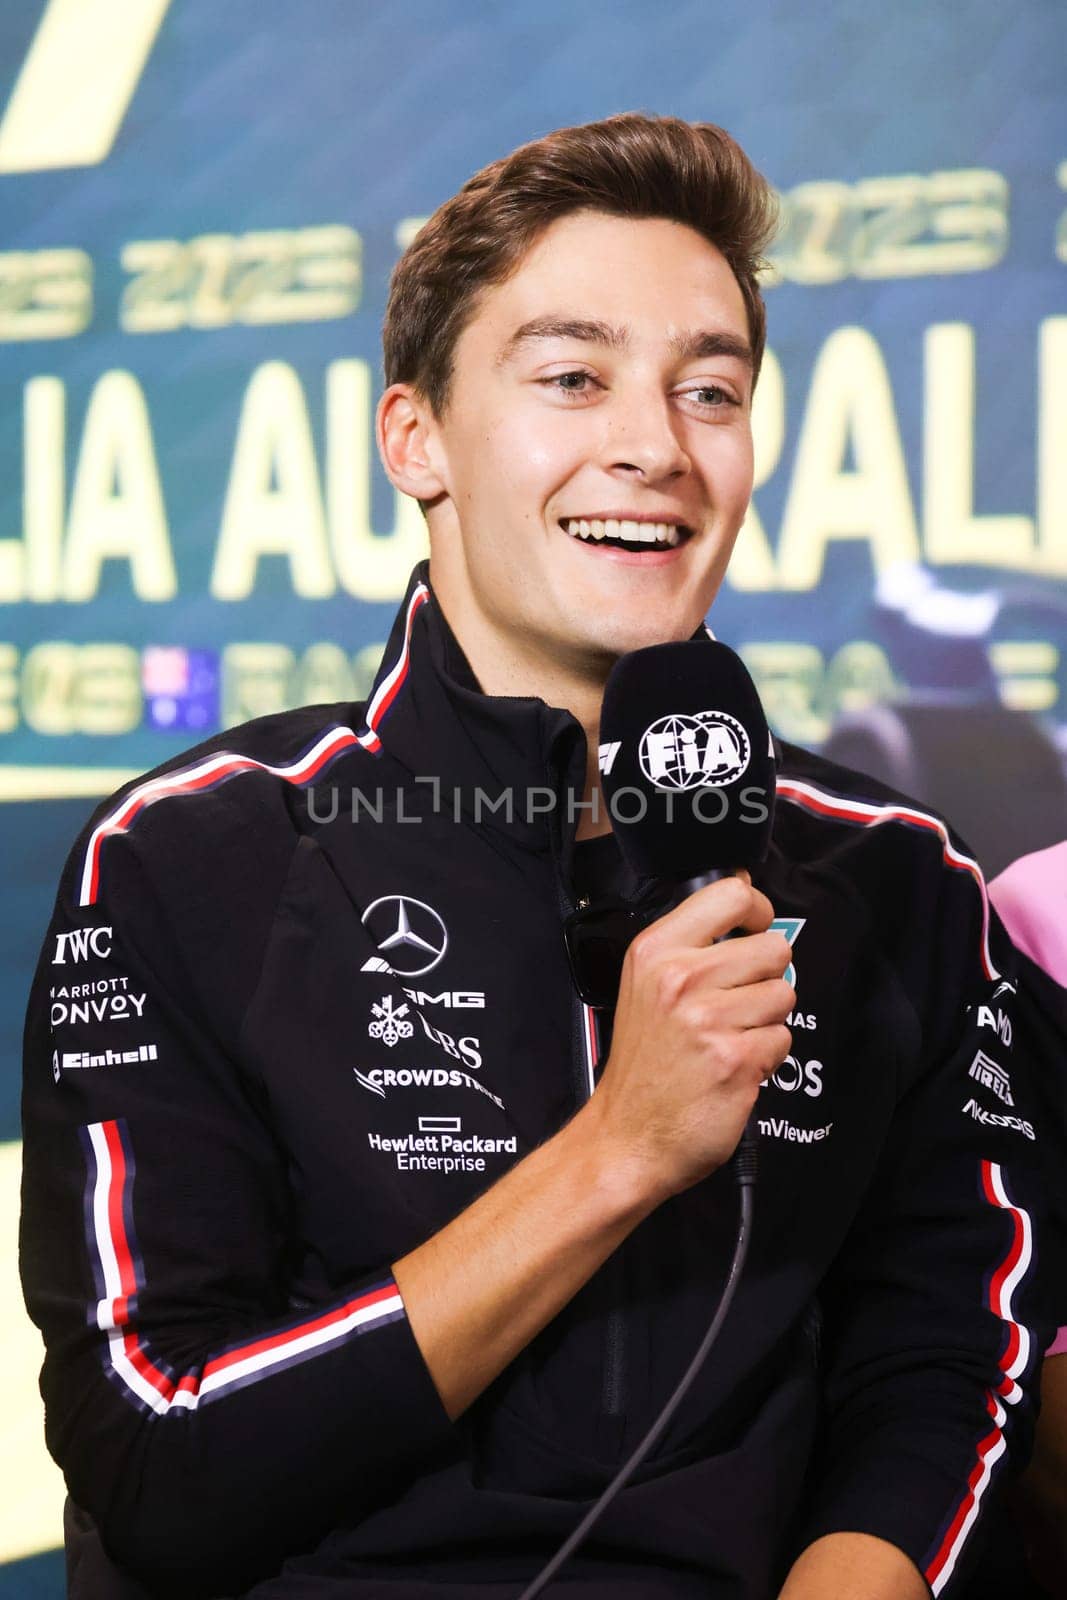 MELBOURNE, AUSTRALIA - MARCH 30: George Russell of Great Britain during a press conference at the 2023 Australian Formula 1 Grand Prix on 30th March 2023